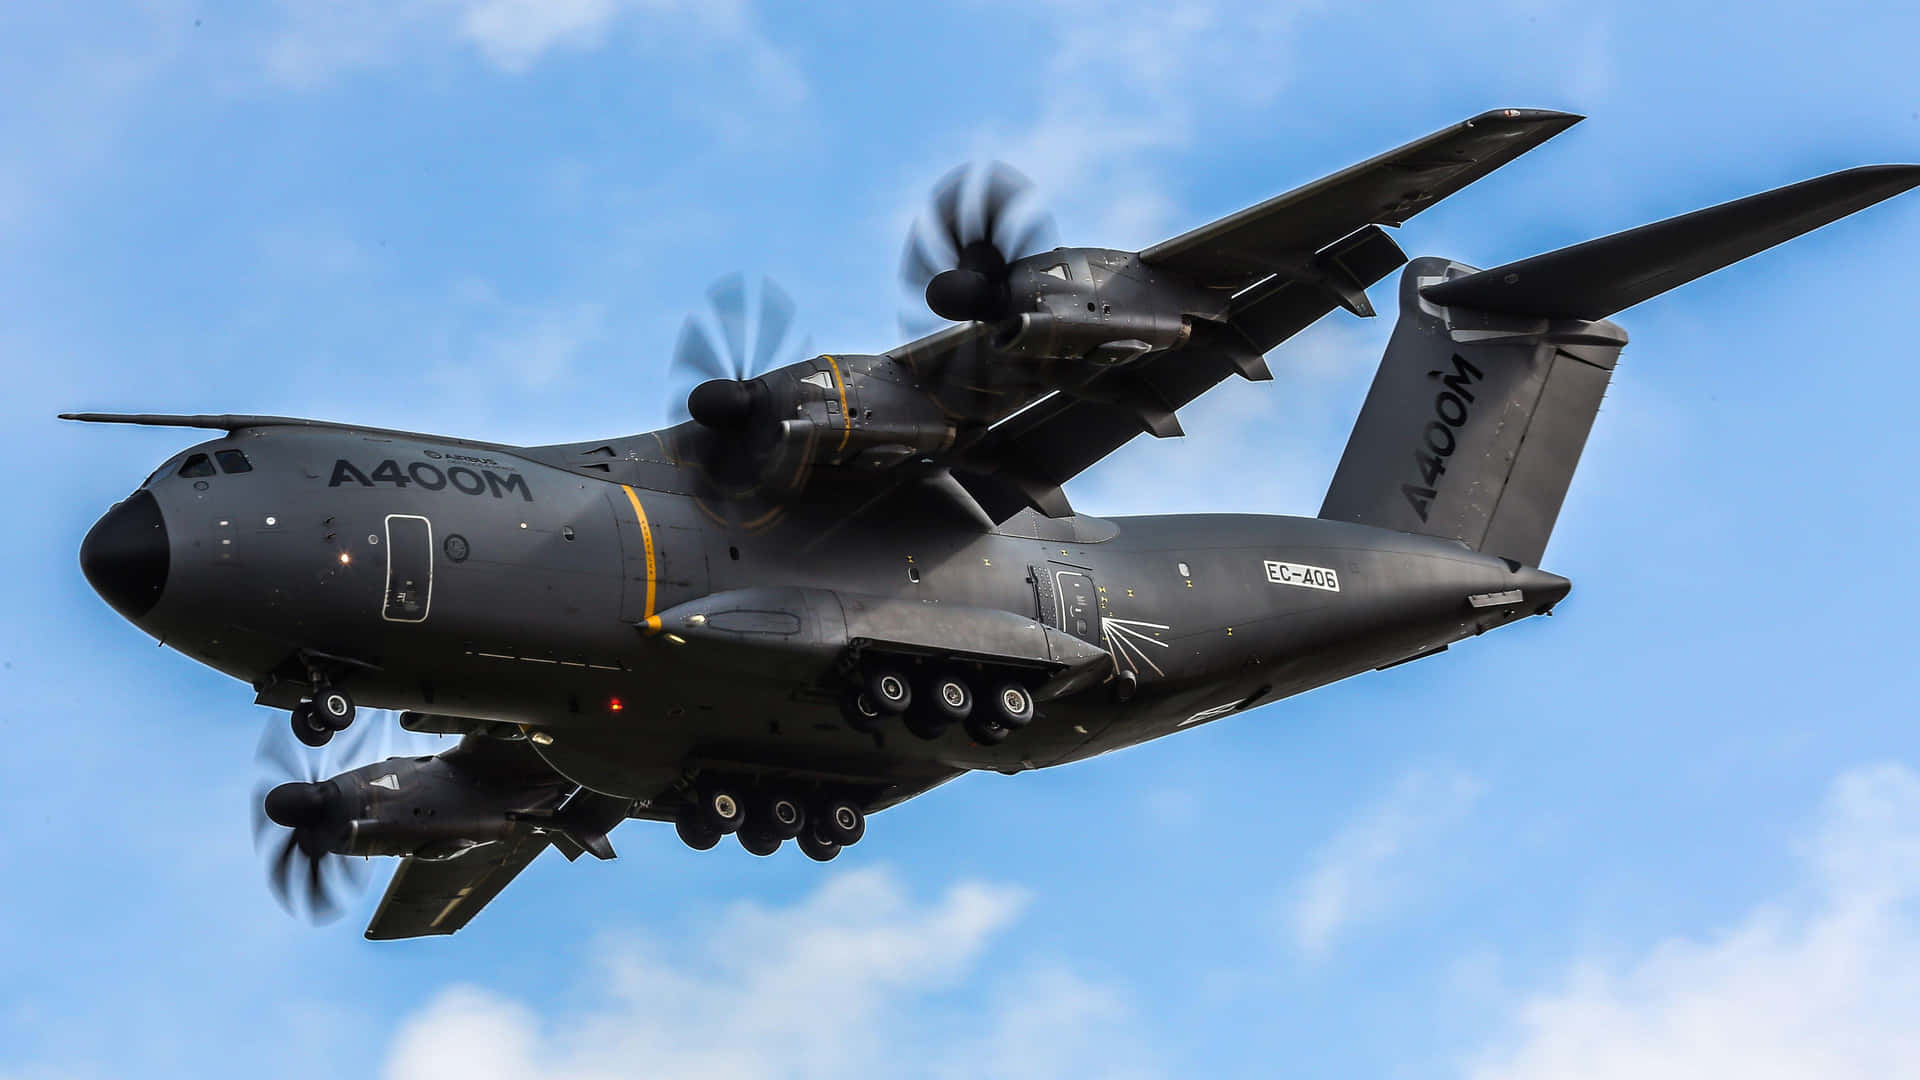 Airbus A400 M Military Transport In Flight Wallpaper